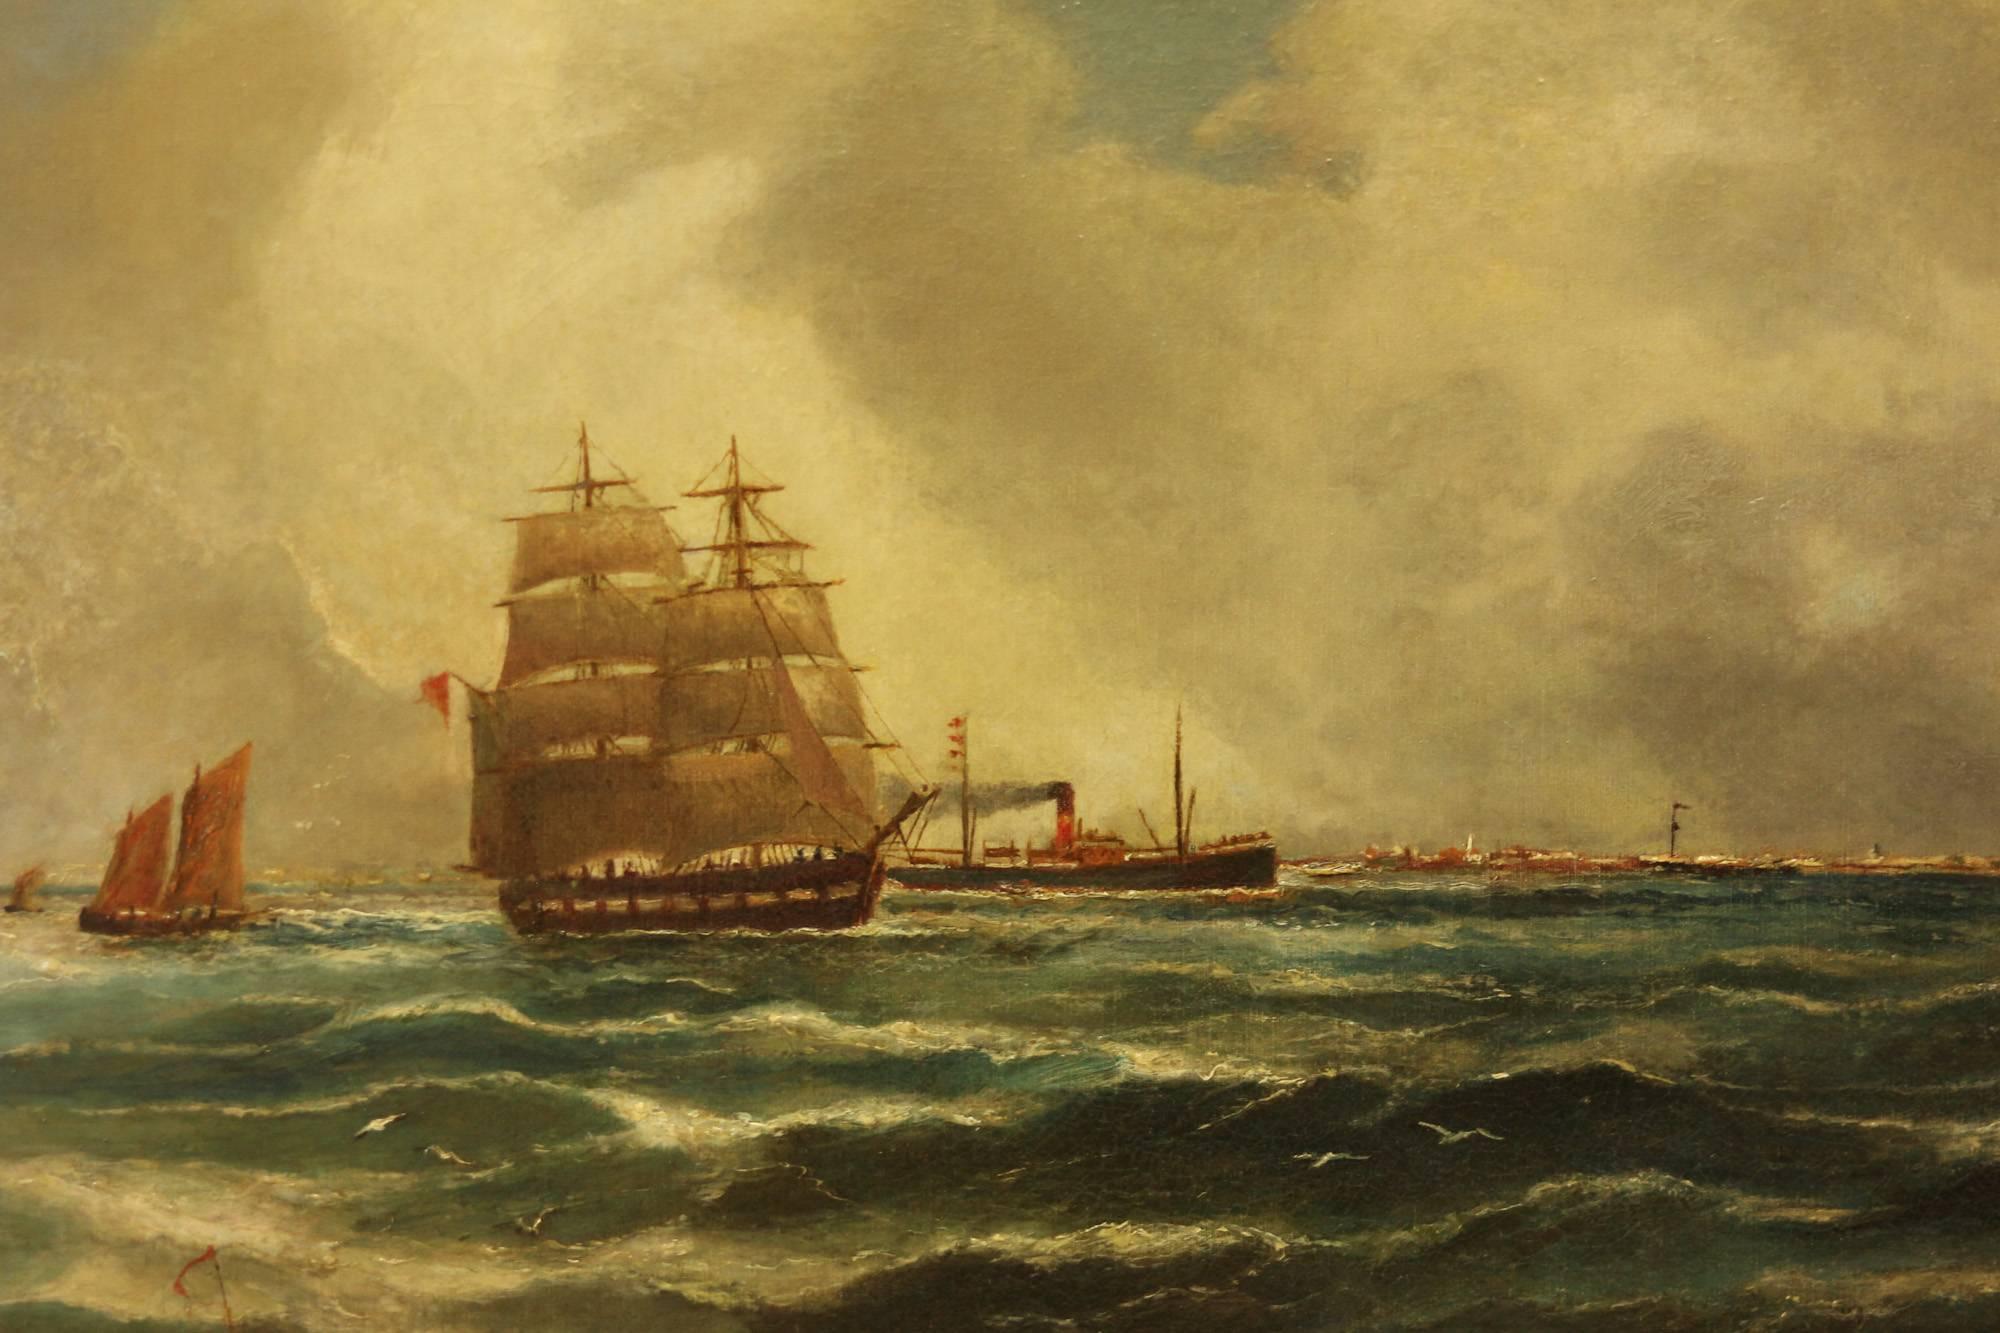 "Off the North-East Coast" oil painting by Bernard Benedict Henry. Bernard Benedict Henry, 1845-1913 younger brother of the Royal Academician Charles Napier Henry, Newcastle artist and regular, oil on canvas, 20 x 30" signed.

All